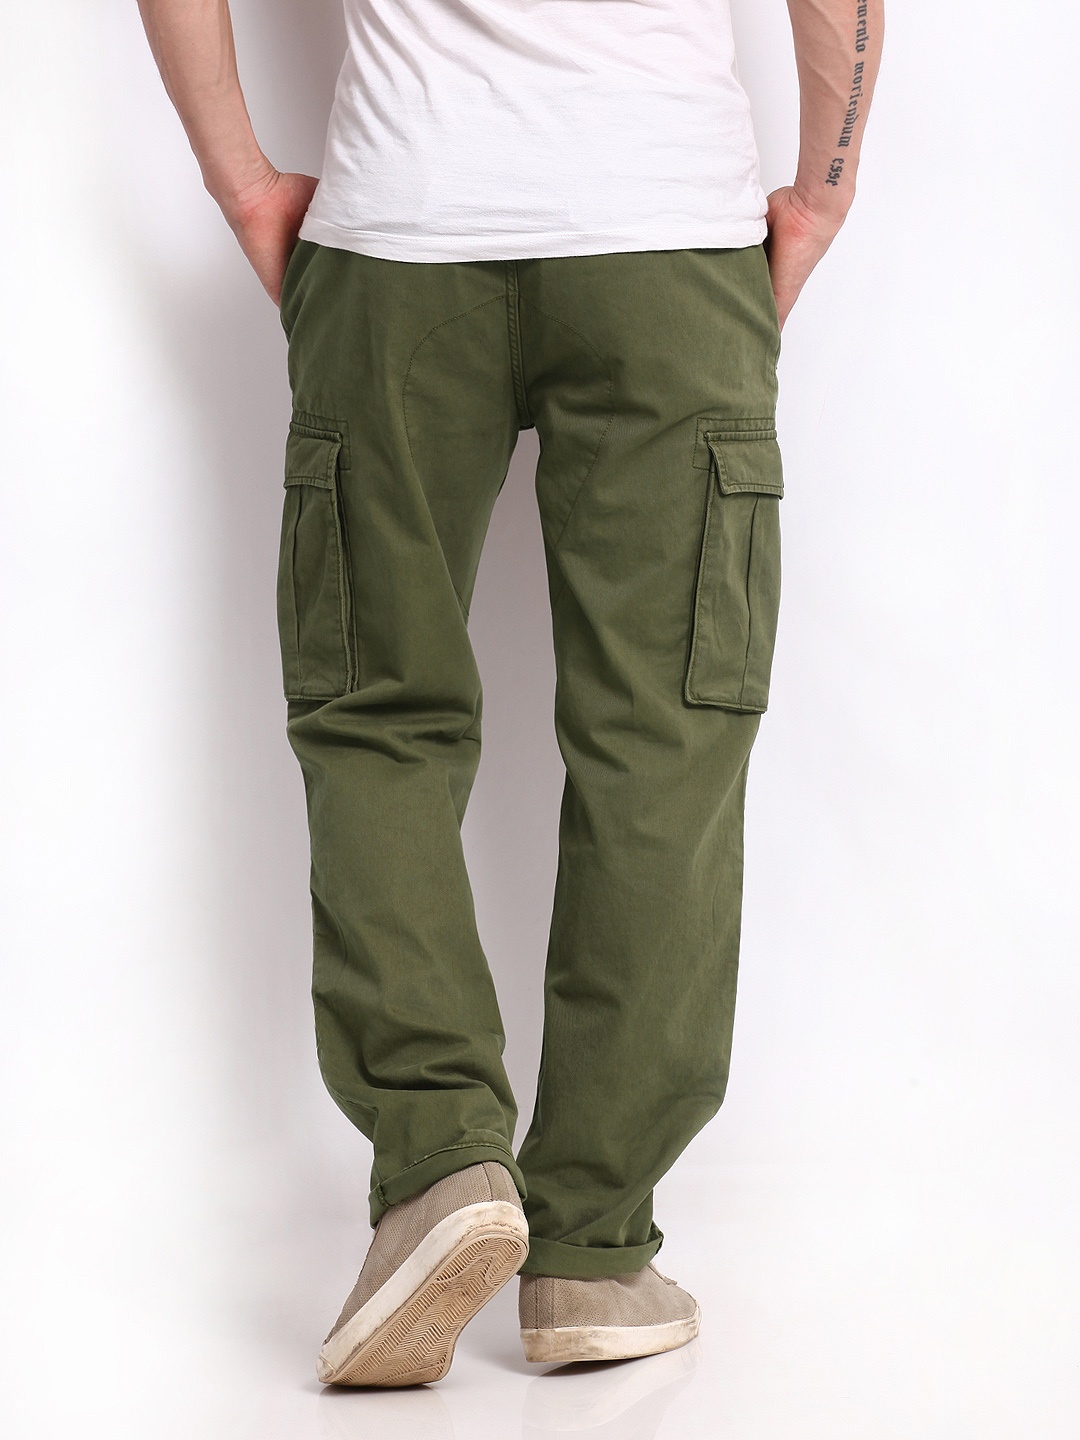 Levis Mens Cargo Pants Relaxed Fit Belgium, SAVE 50% 